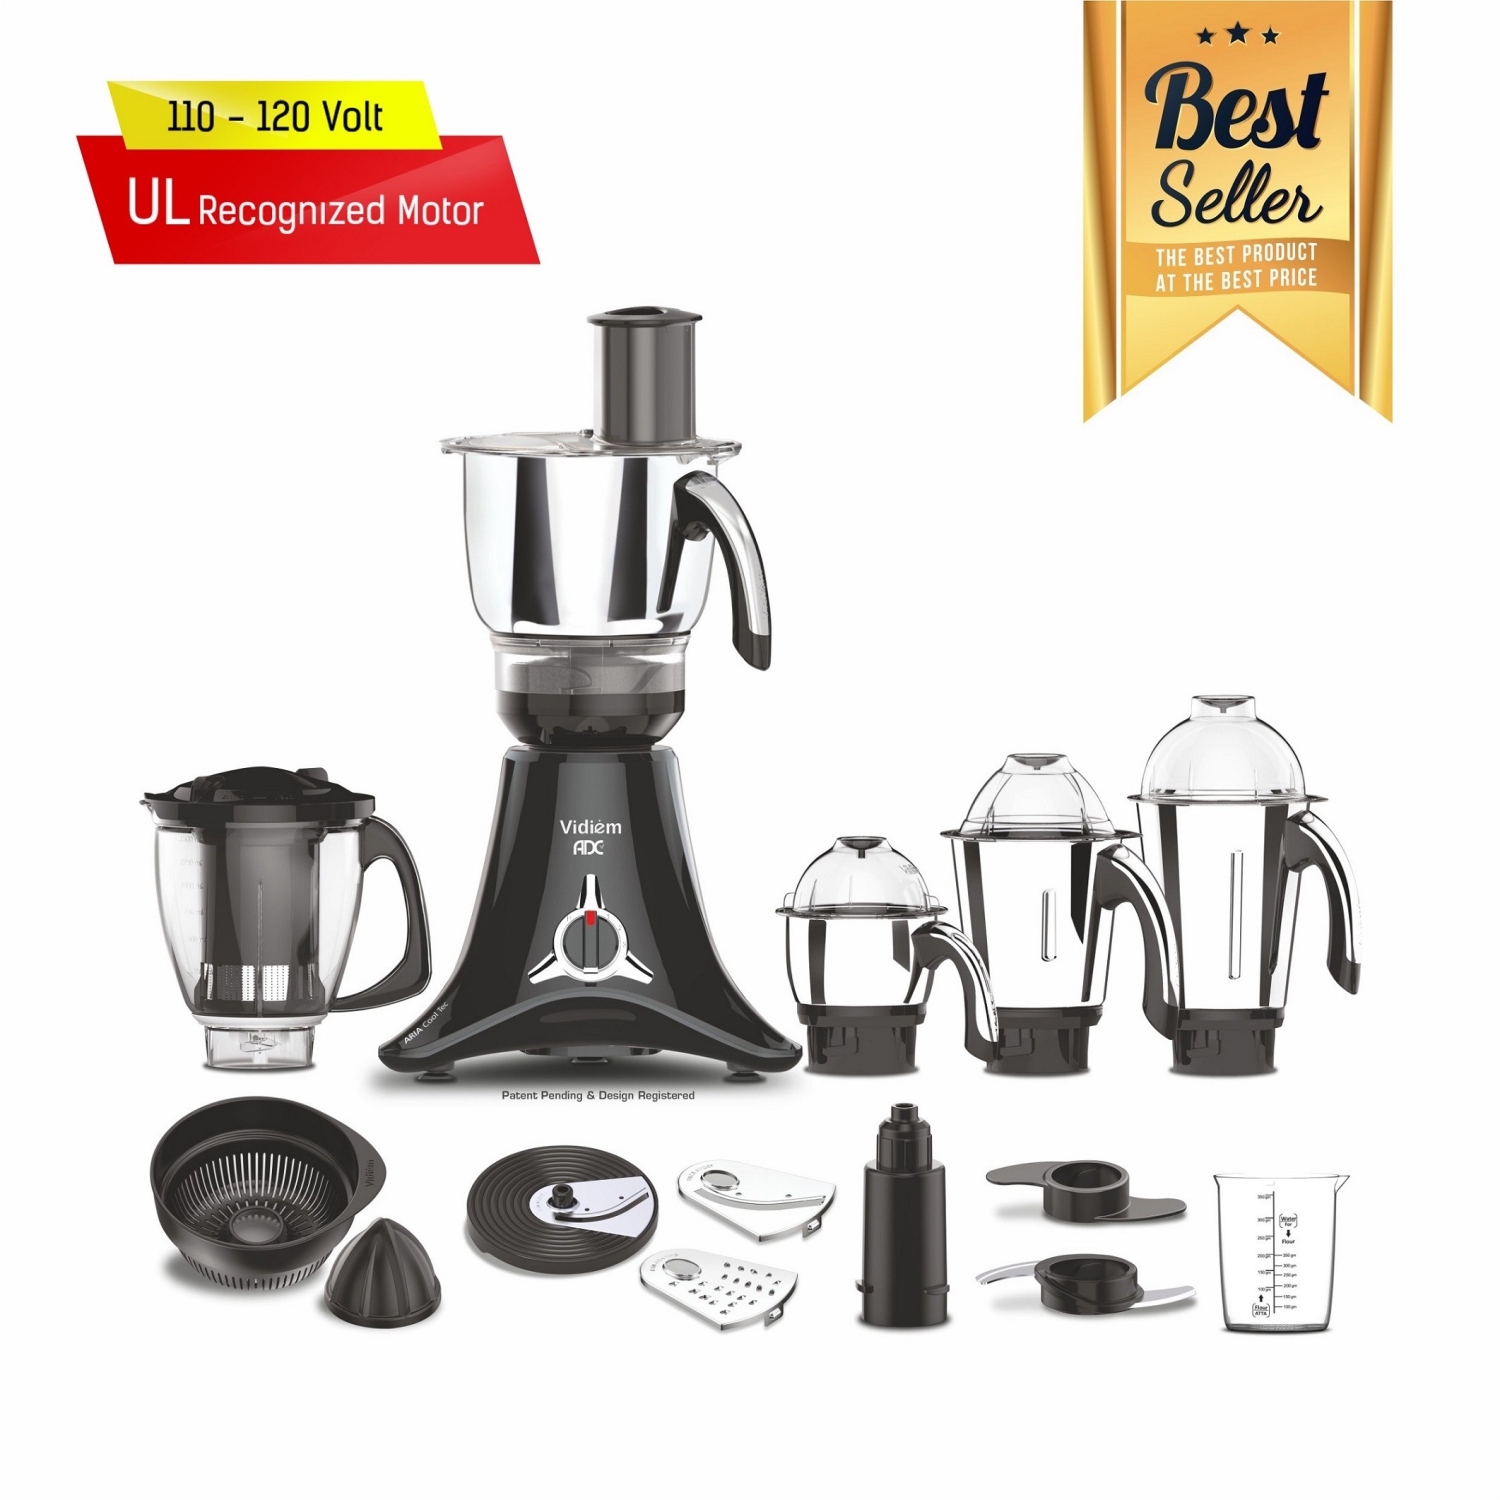 Vidiem ADC Mixer Grinder, Blender, Food Processor- 750W / 5 Jars - Indian Mixer Grinder with Almond Nut Milk Juice Extractor, Spice & Coffee grinder 110V for use in Canada / USA